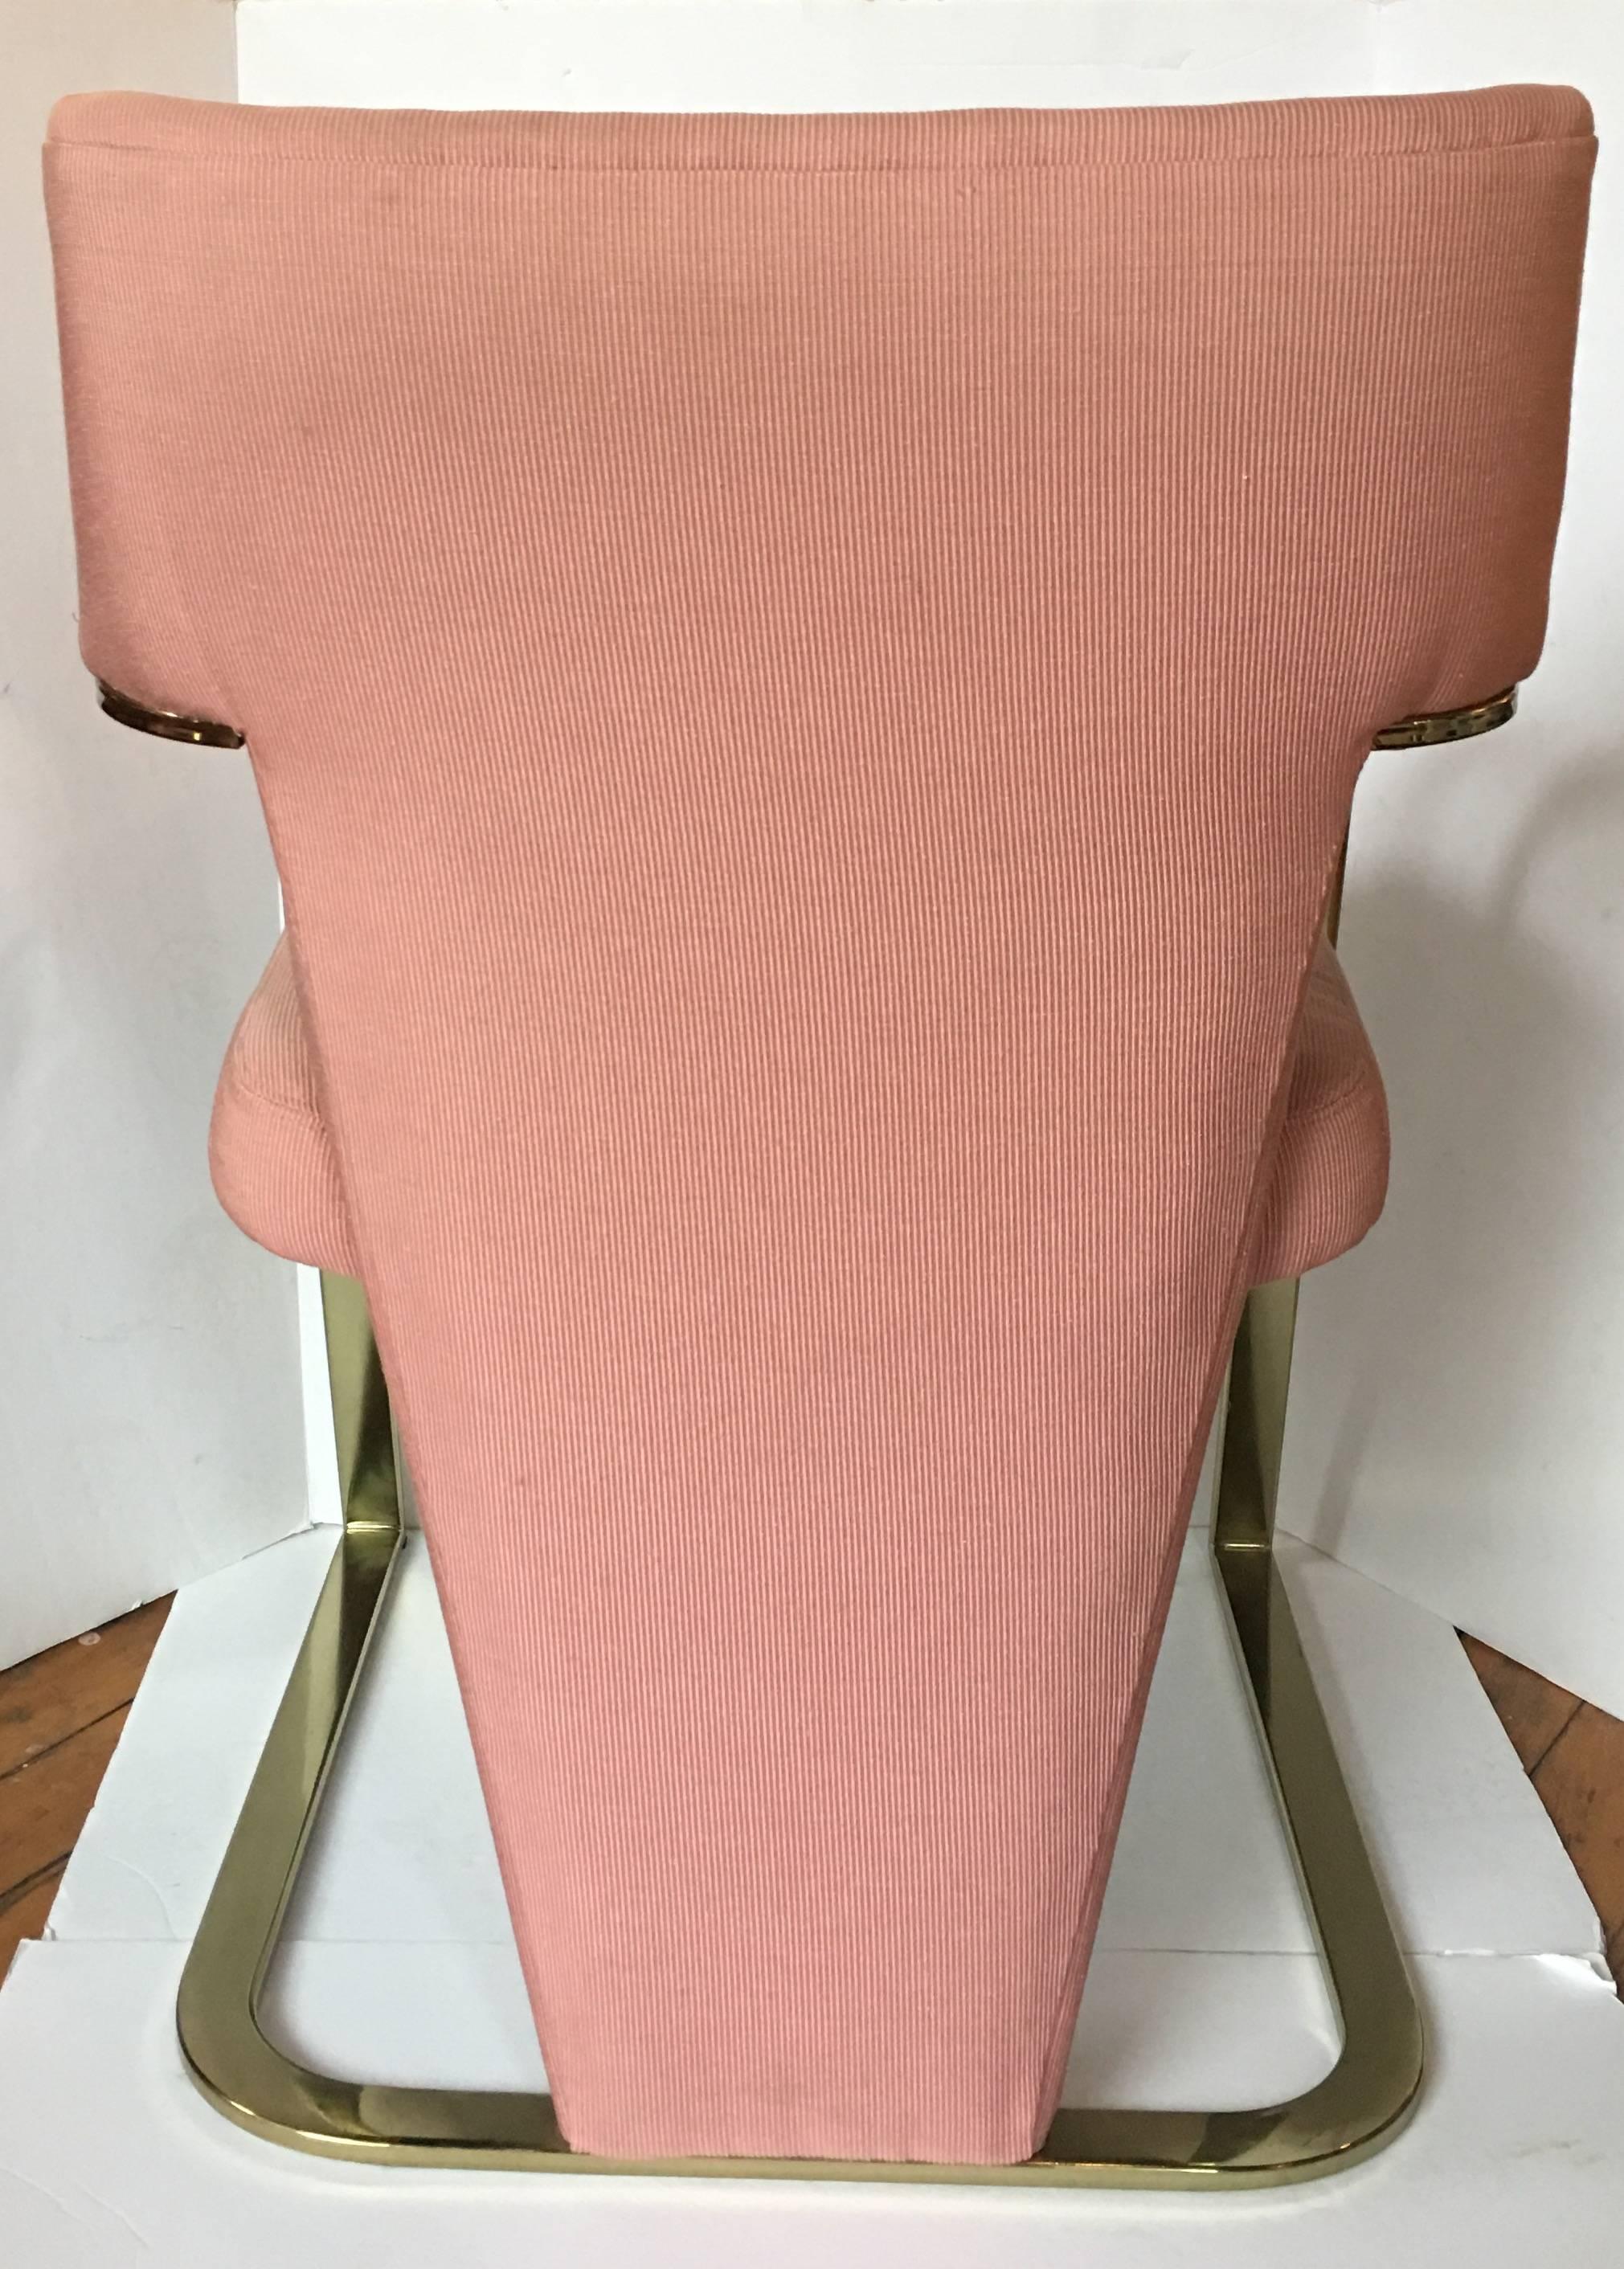 Set of four Hollywood Regency style brass plated metal arm chairs designed by Randy Culler for Carson's of High Point. Chairs feature sculptural modern cantilevered flat bar frames with original pink upholstery. Chairs have been stored since the